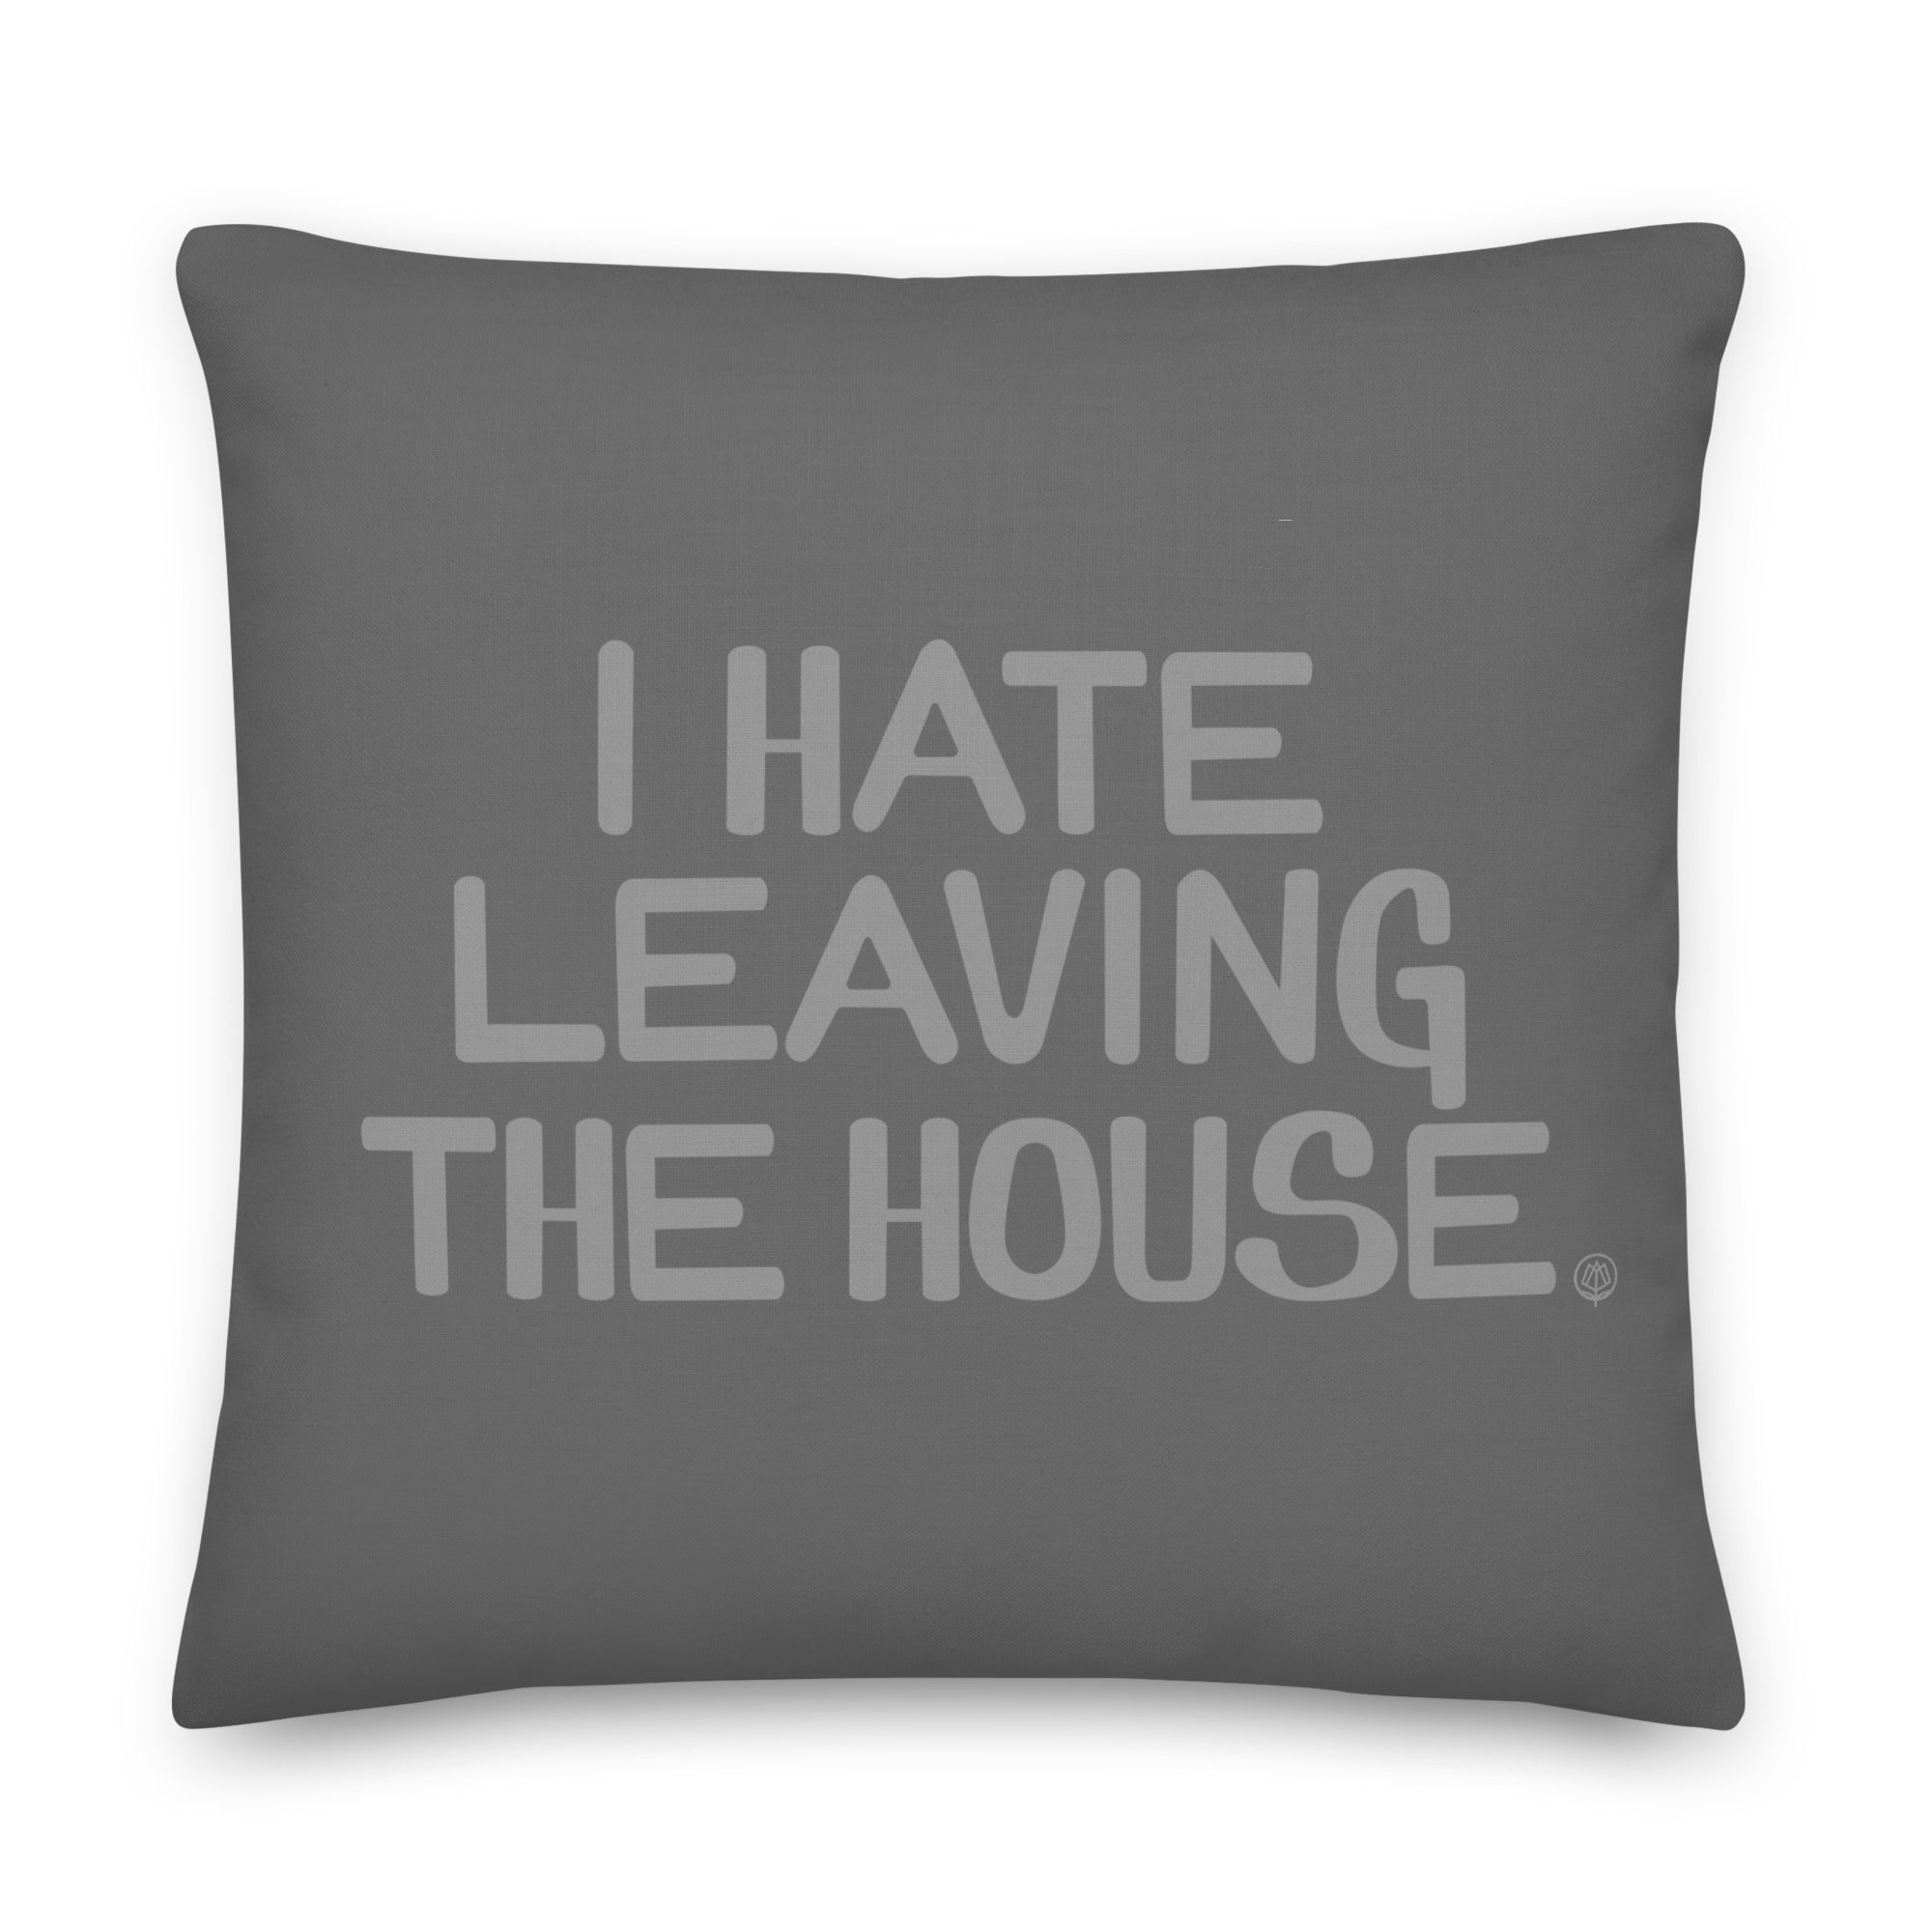 I Hate Leaving the House Pillow - Grey